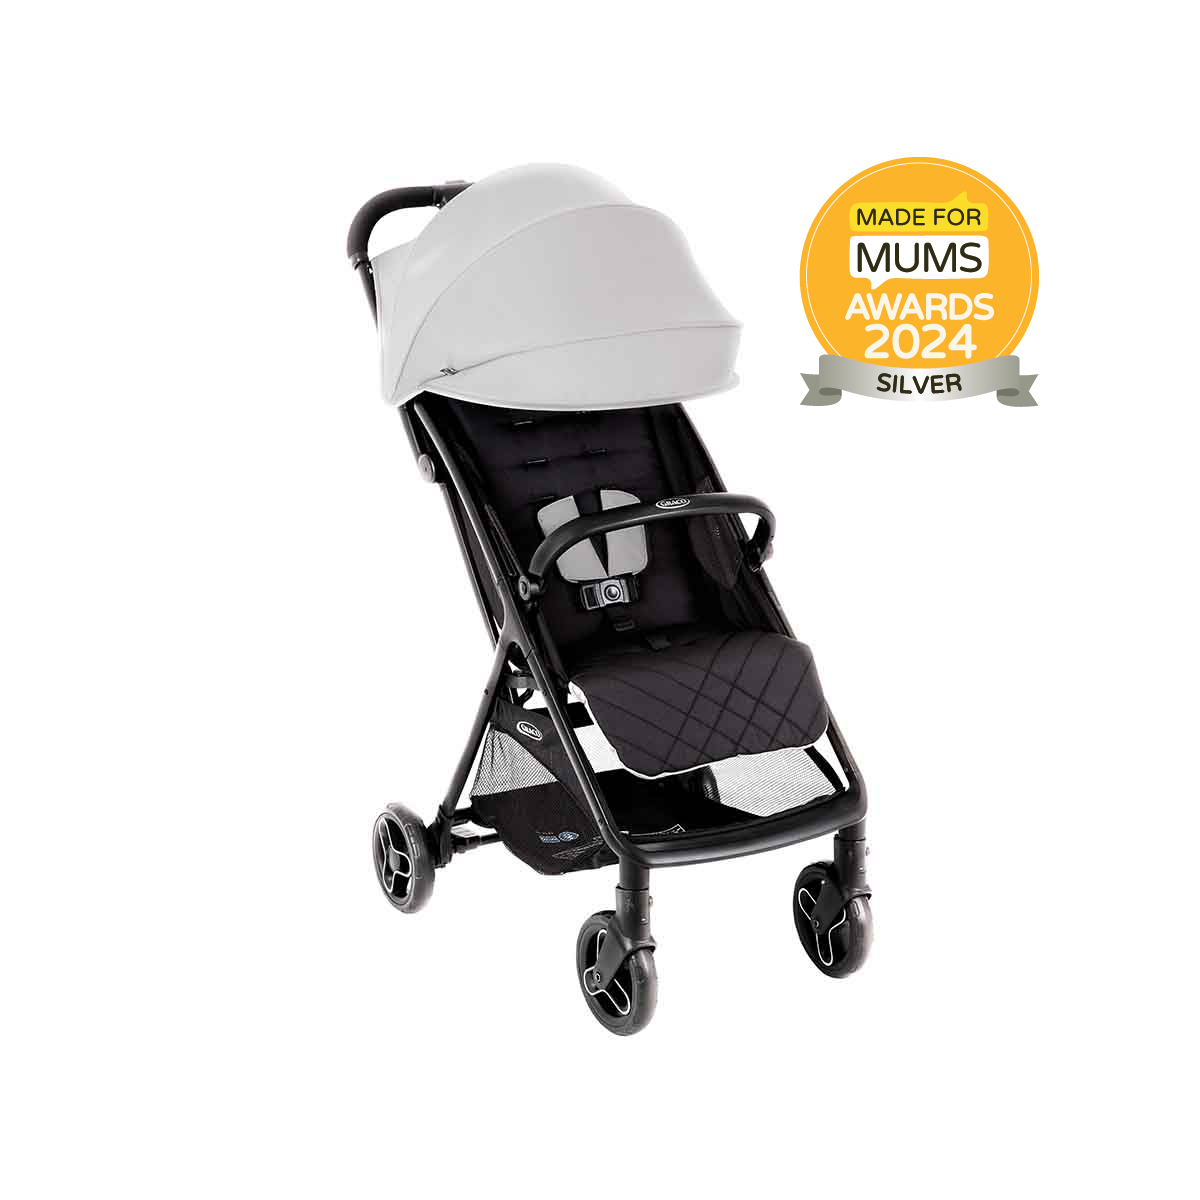 Graco Myavo travel stroller three quarter hero angle on white background with Made For Mums Bronze 2024 Award.